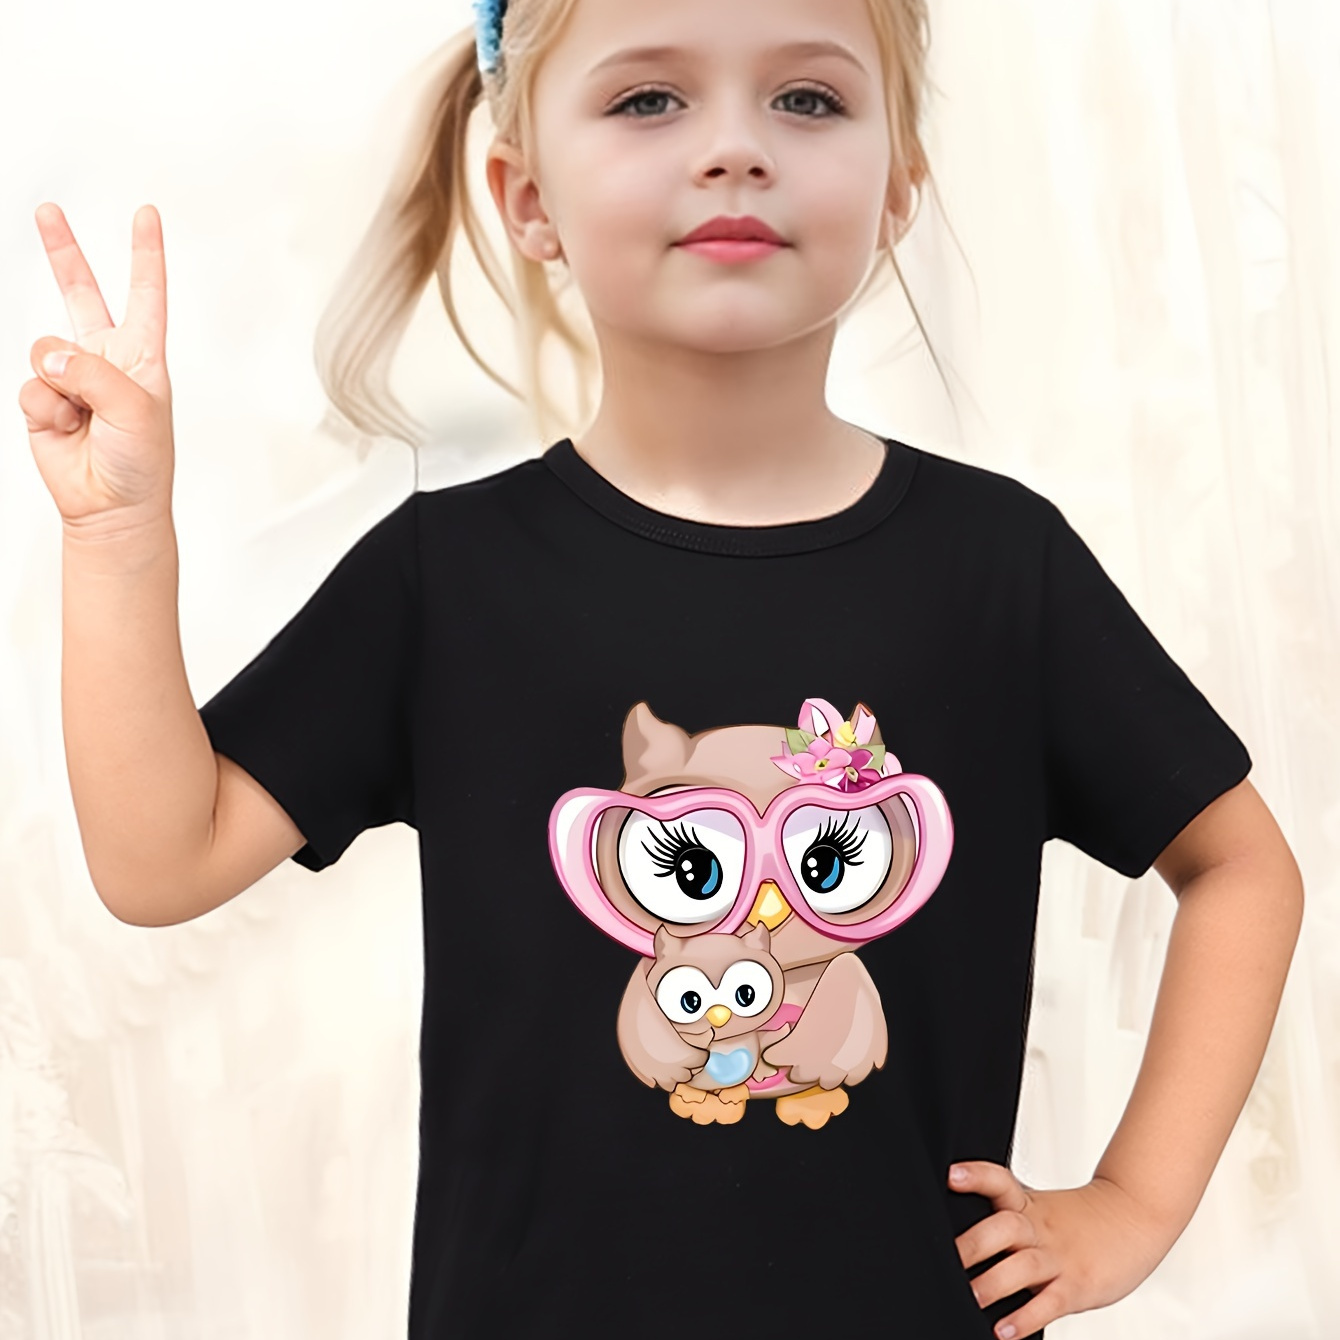 

100% Cotton, Adorable Owls Print Short Sleeve T-shirt, Casual & Versatile Tees Tops For Girls Summer Christmas Gift